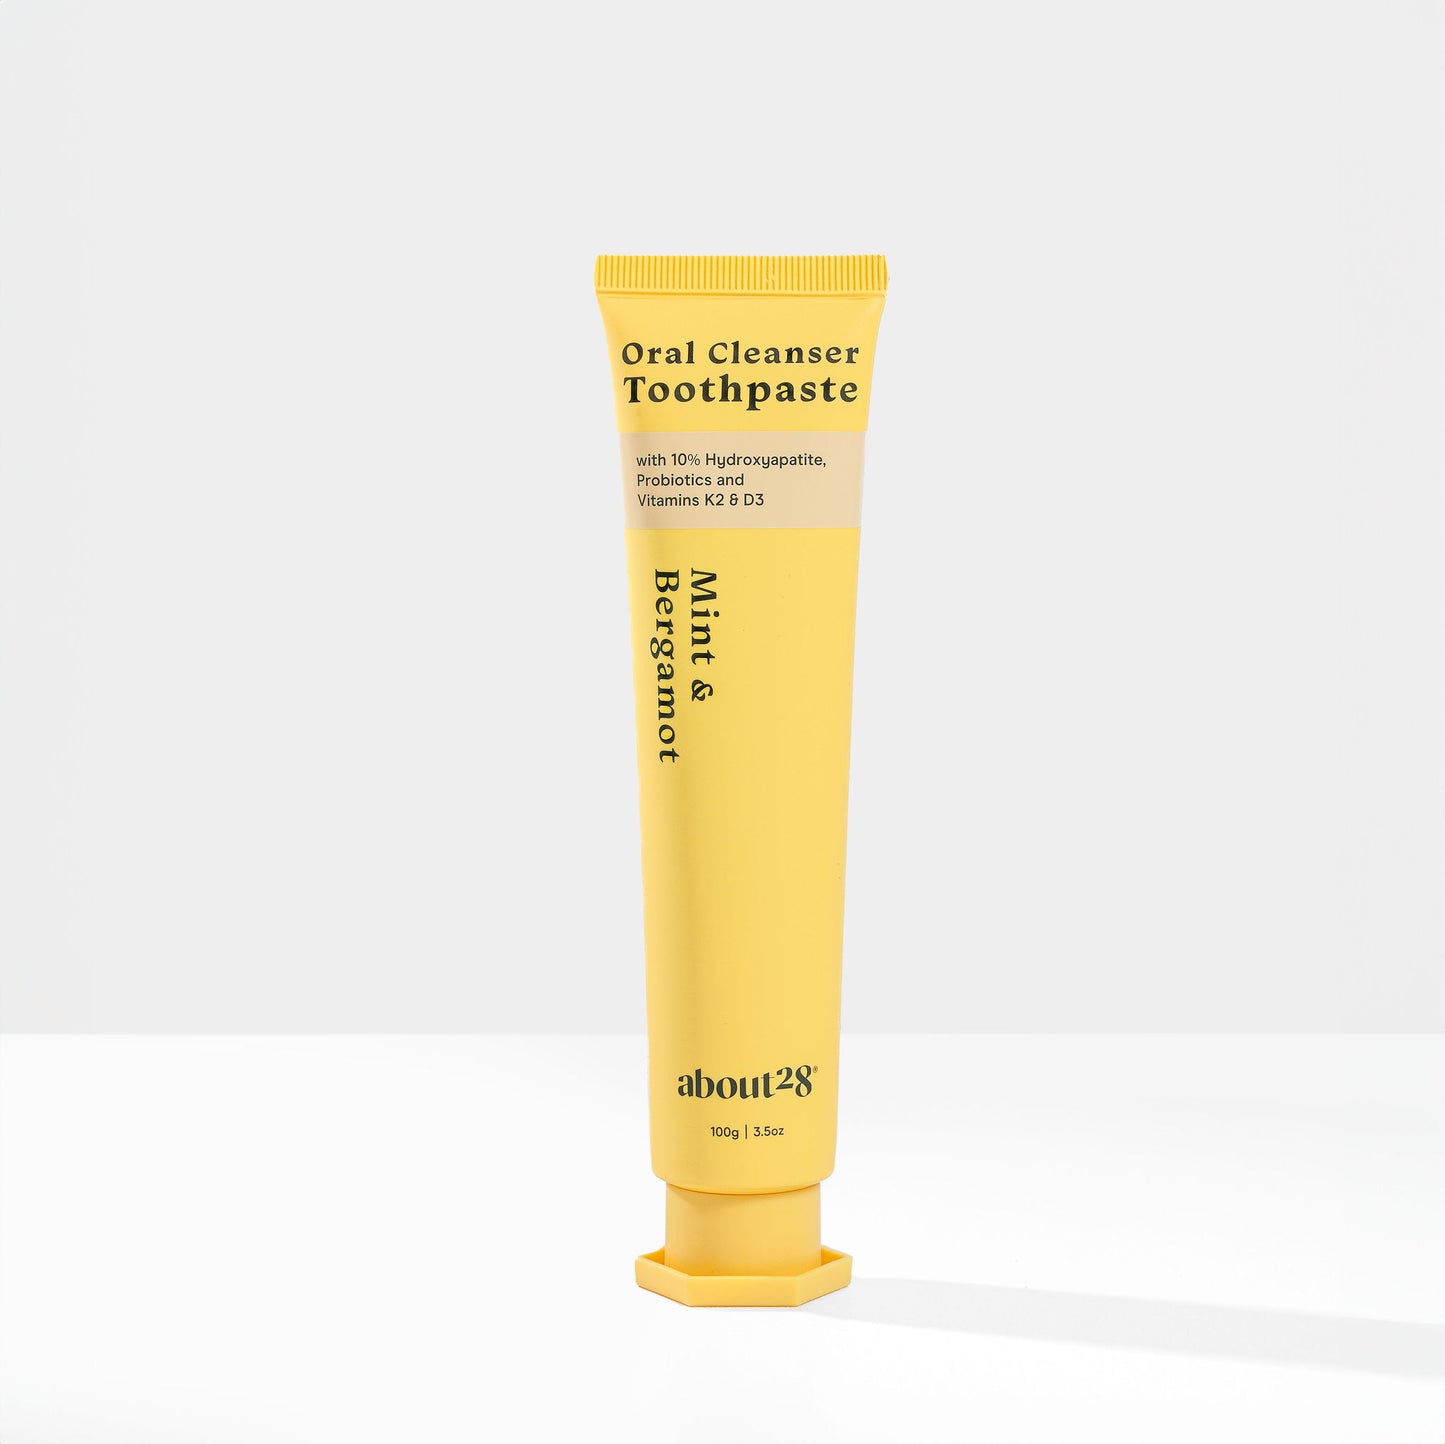 Oral Cleanser Toothpaste